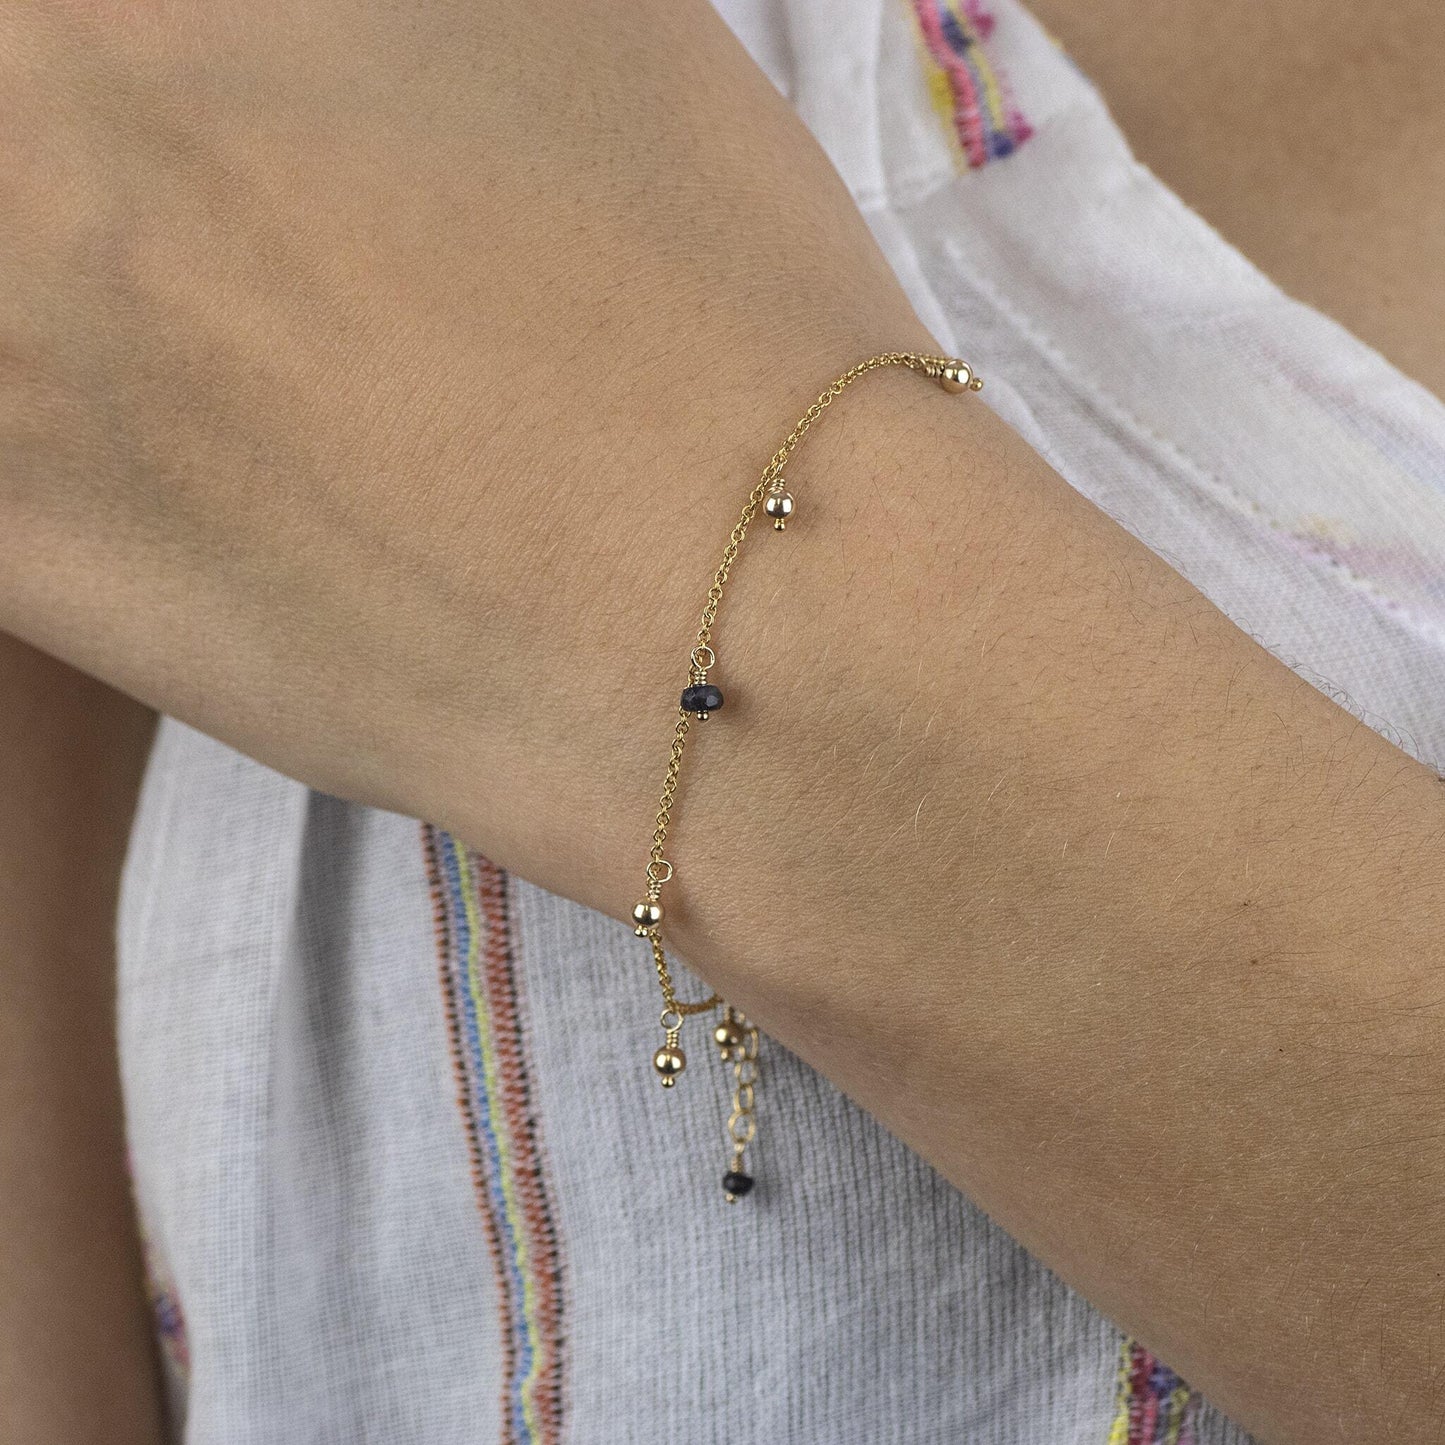 18th Birthday Gift - Delicate Double Birthstone Bracelet - Silver & Gold